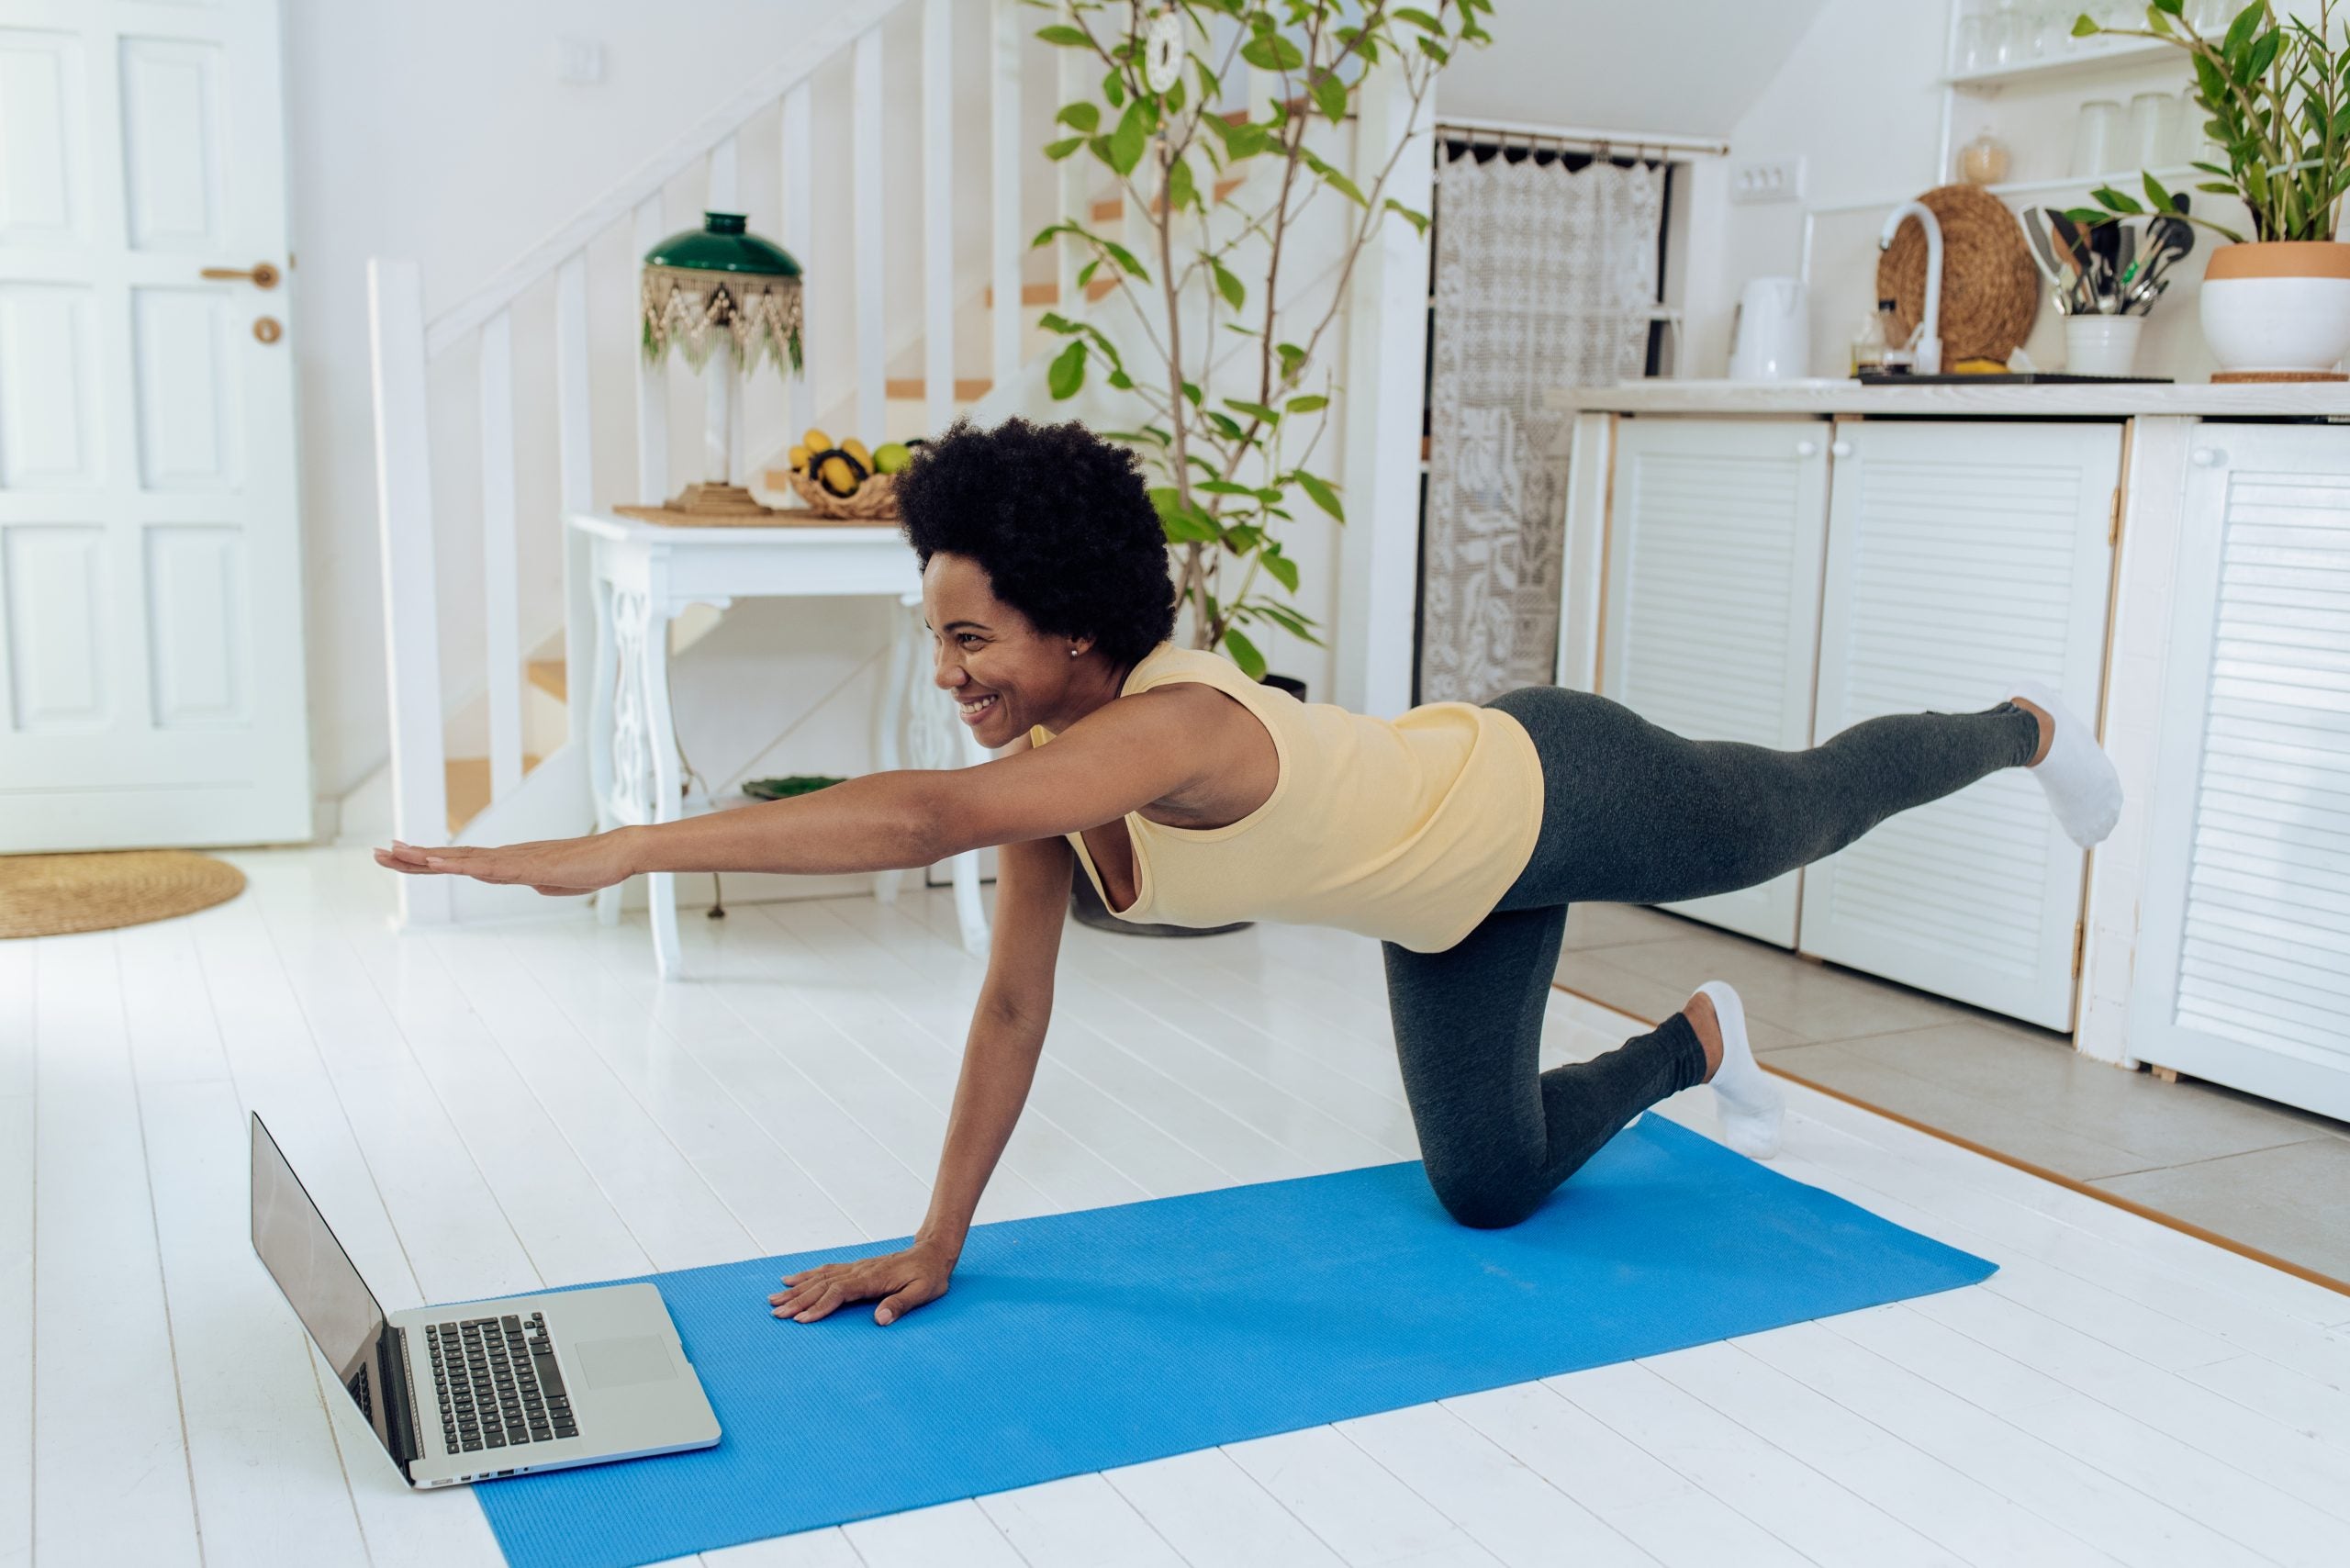 25 Gym Essentials For an At-Home Workout